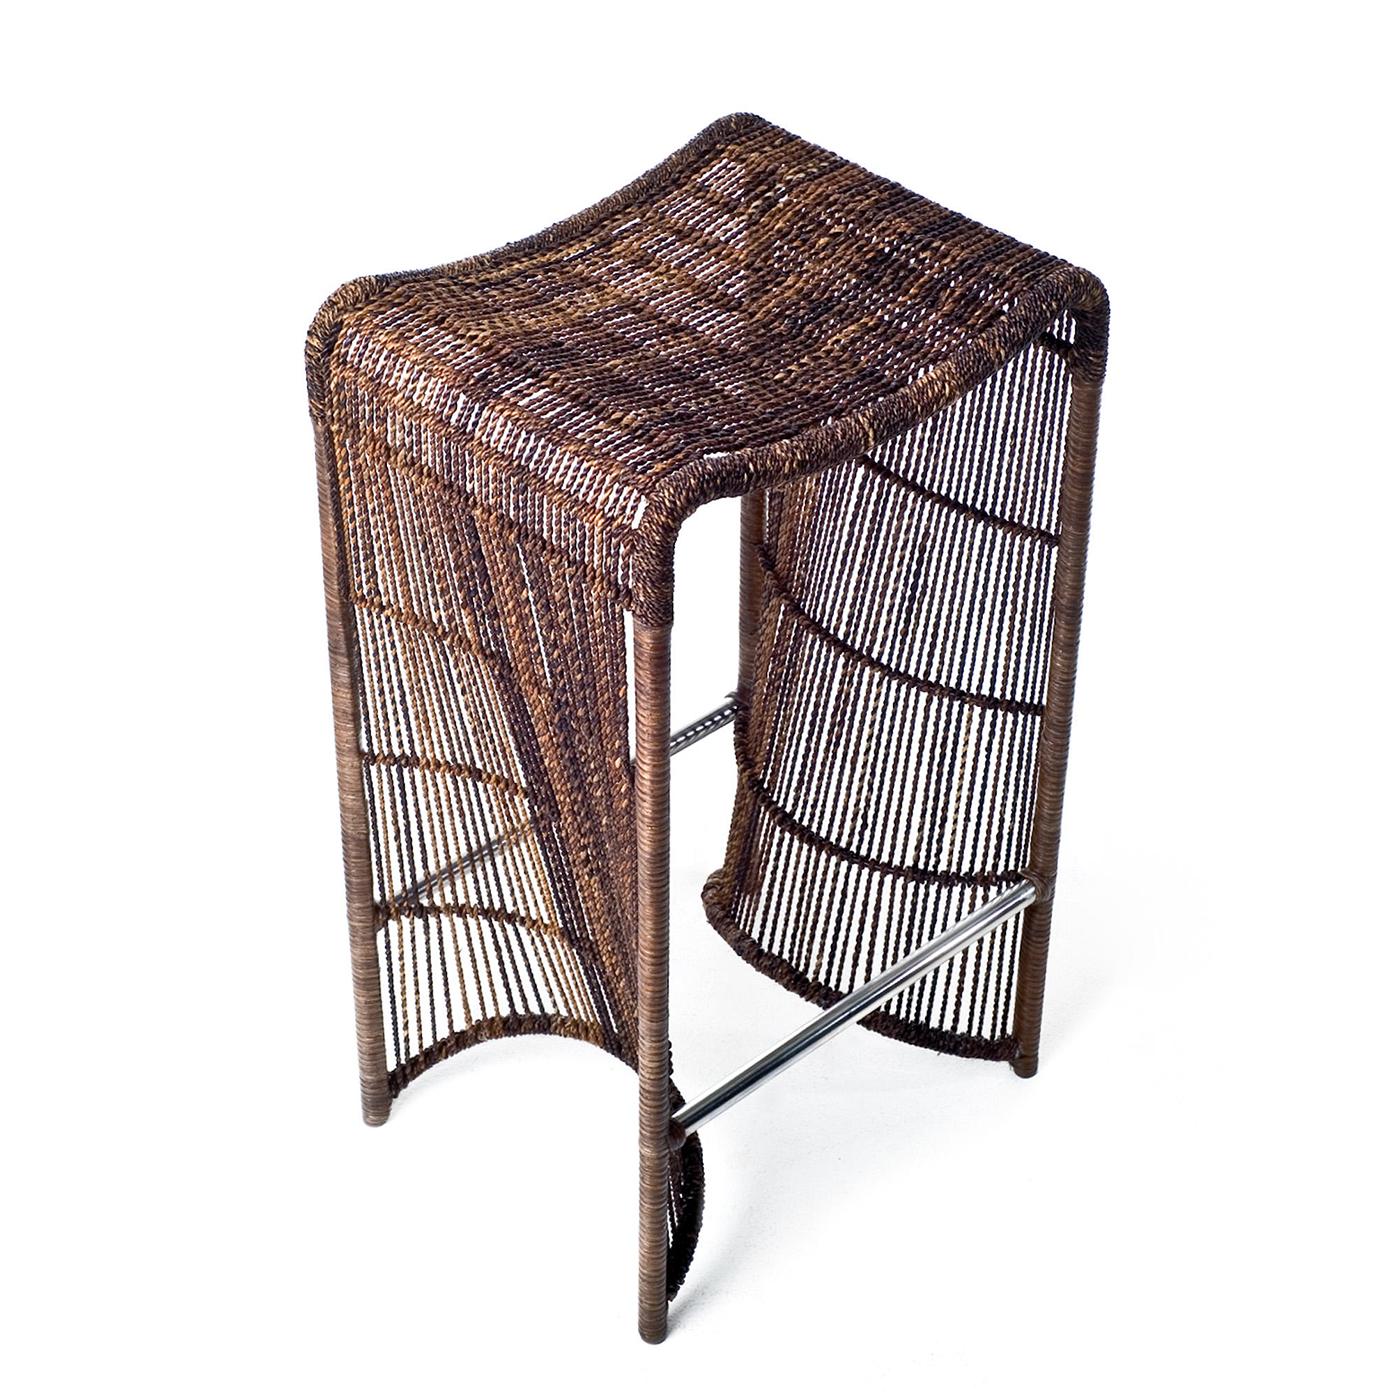 Stool Iguan with structure in stainless steel
and steel. With abaca wood fiber from Sumatra
and nylon. Handmade strong stool.
Lead time production if on stock 2-3 weeks,
if not on stock 15-16 weeks.